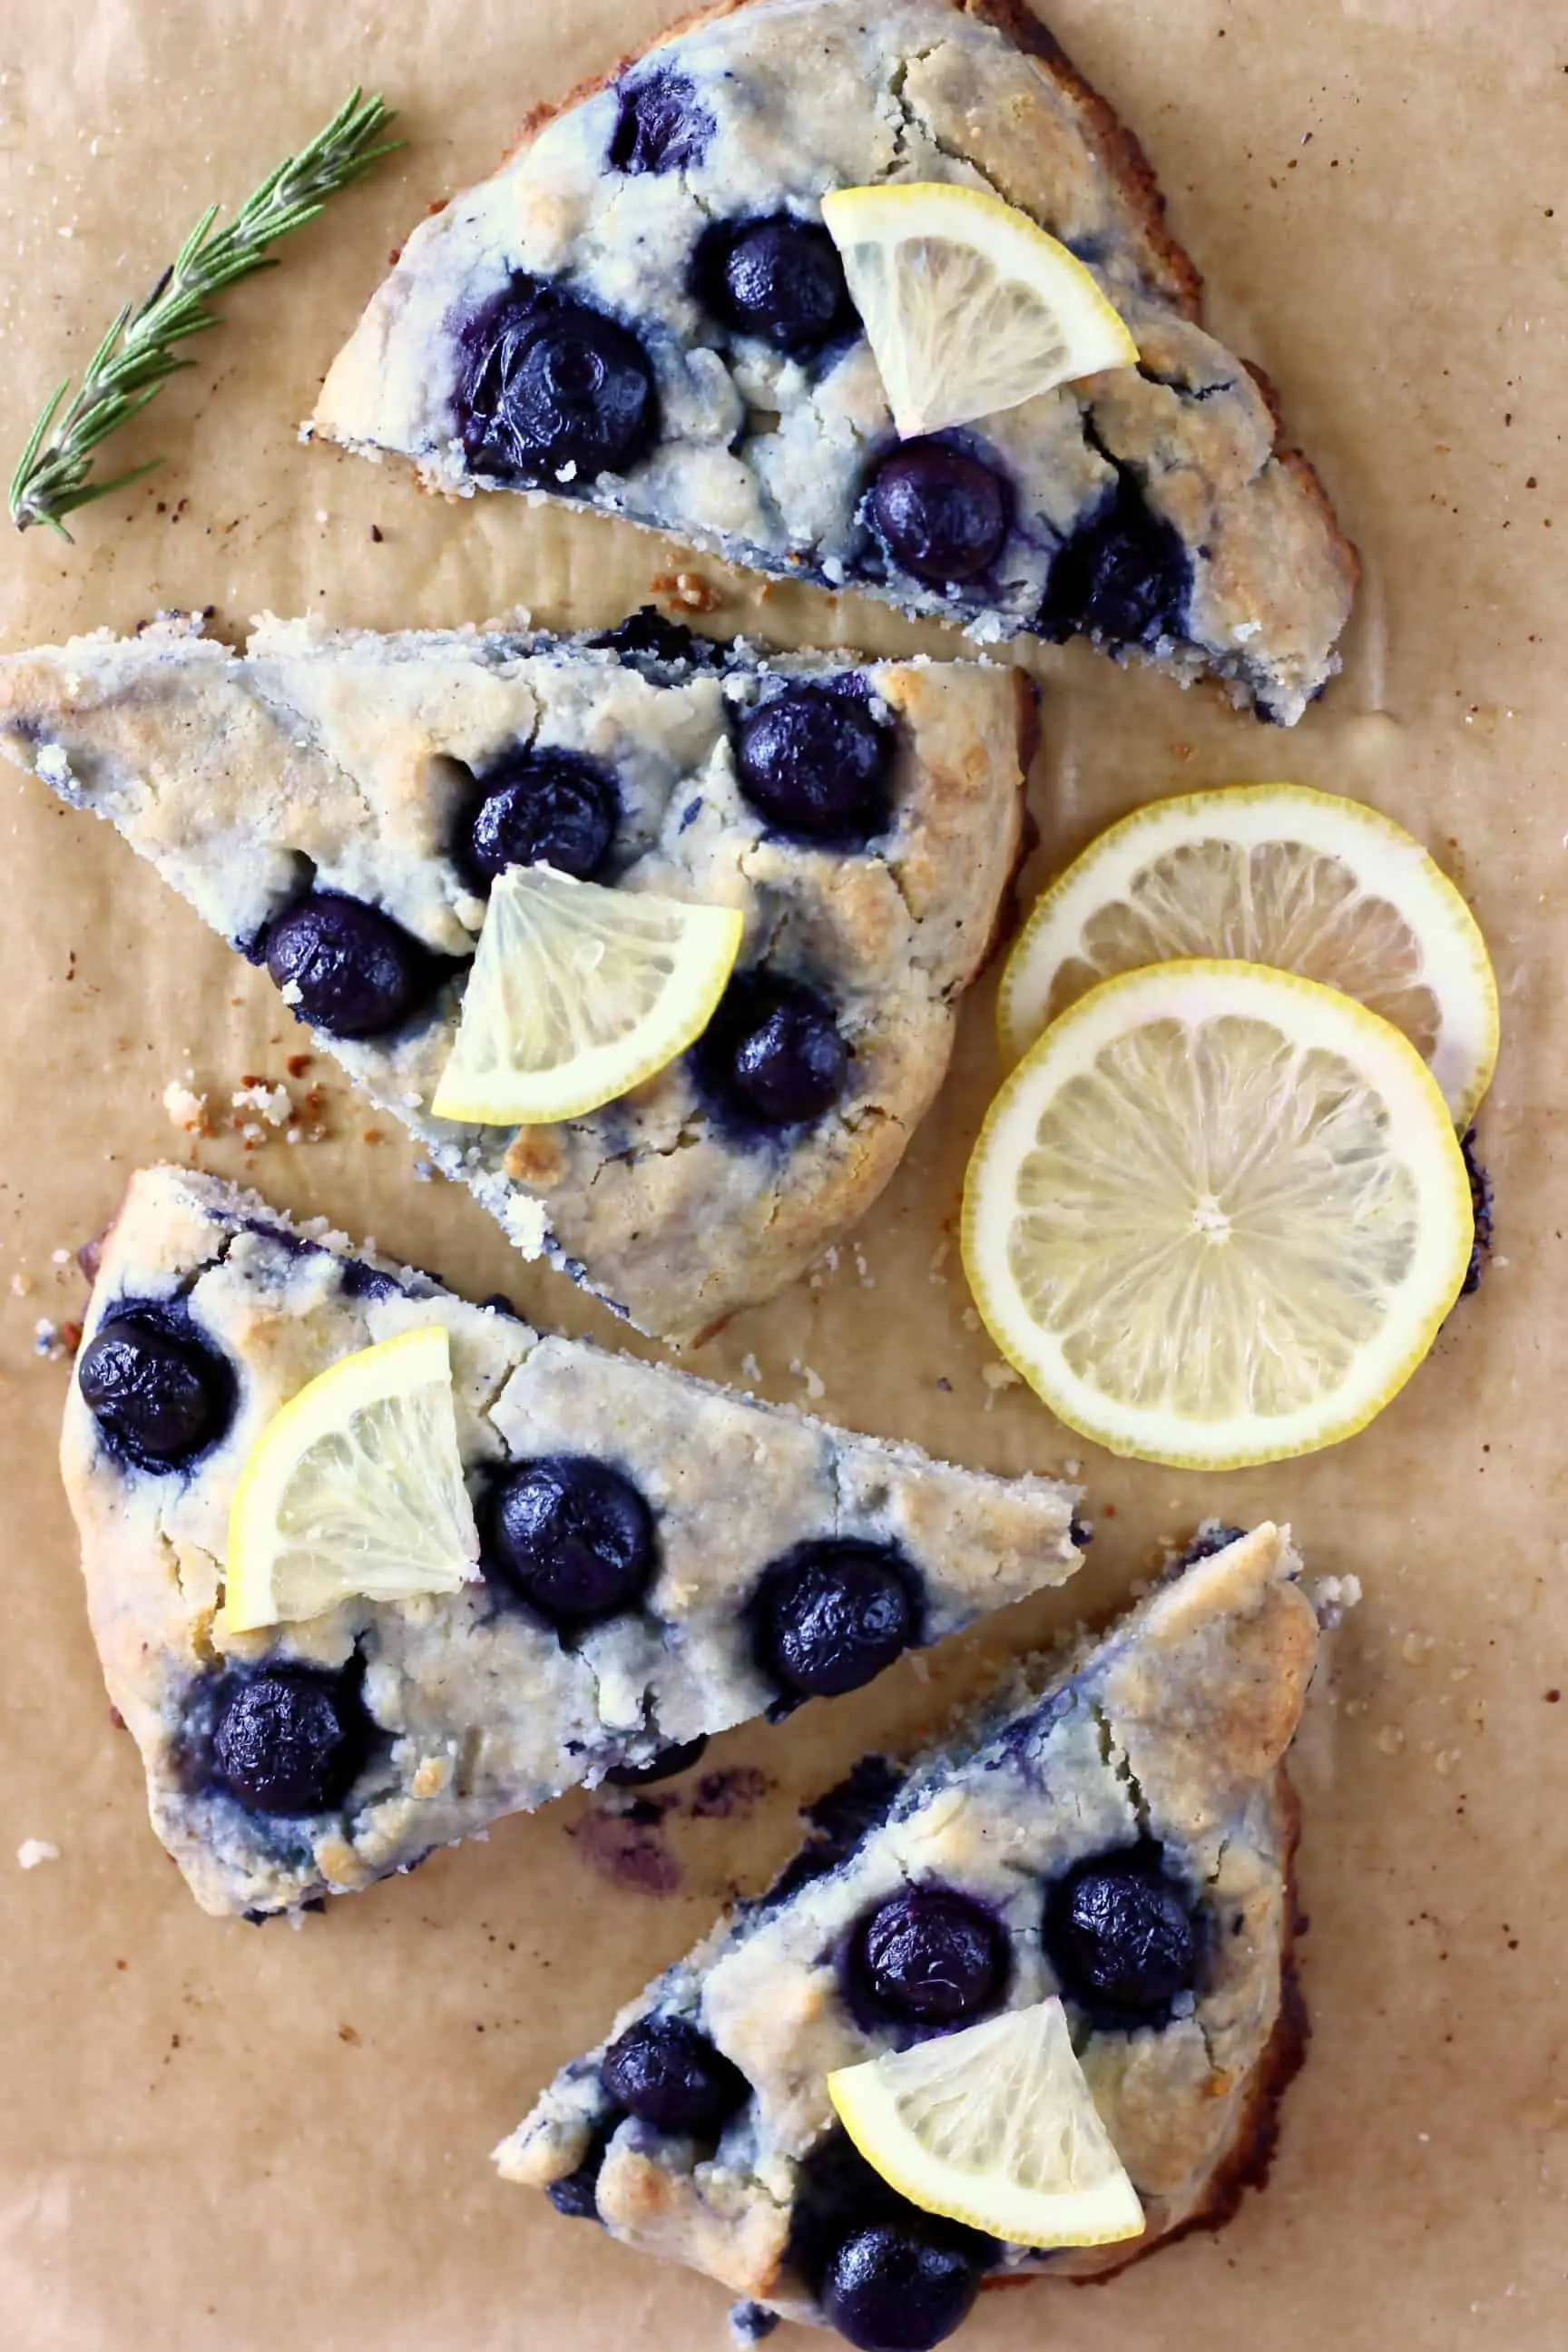 Four triangular gluten-free blueberry scones topped with lemon wedges on a sheet of brown baking paper